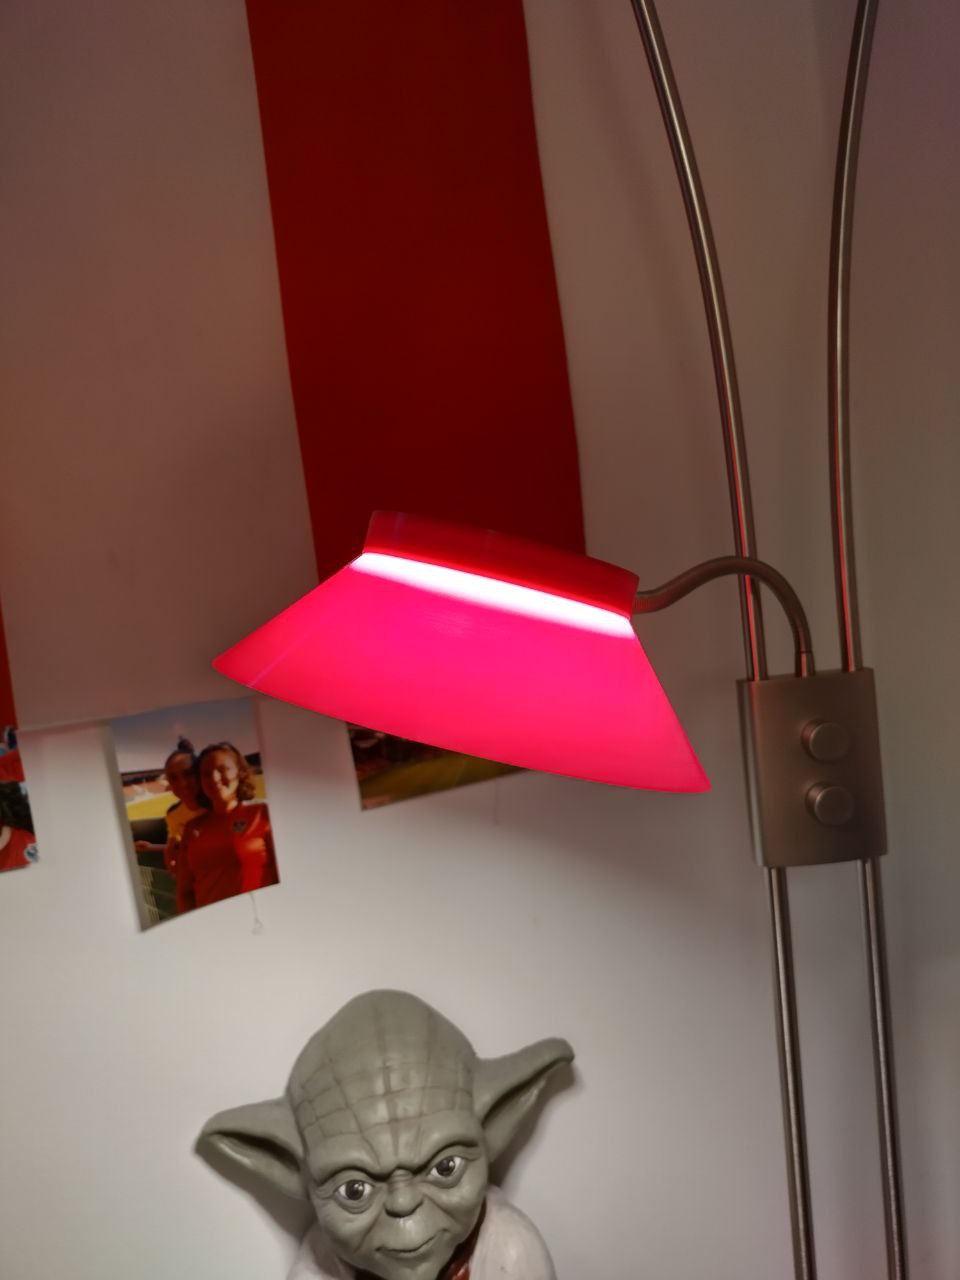 Lampshade for "LED-Deckenfluter Helia rund"